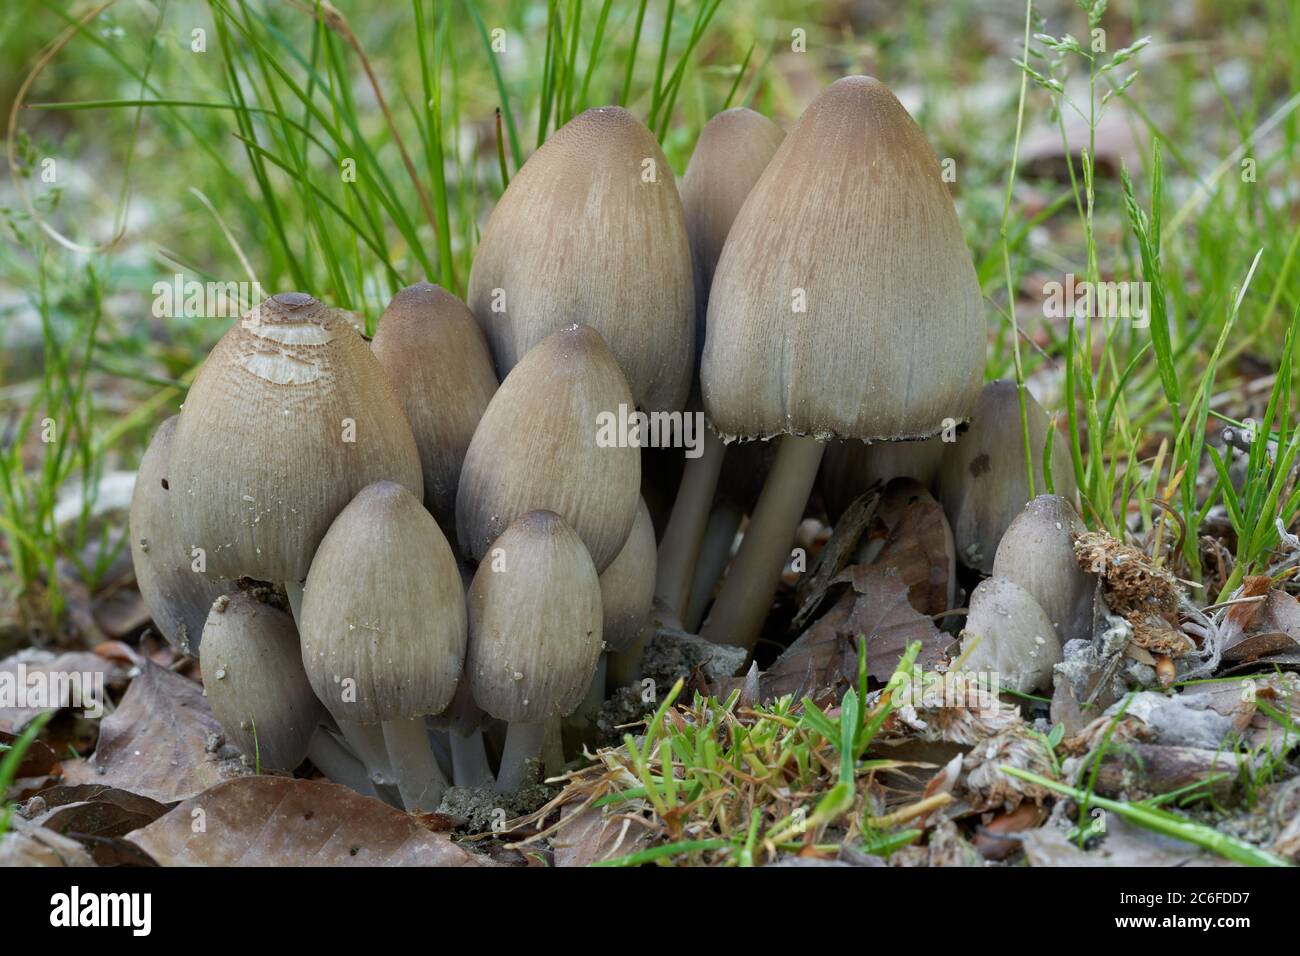 Wild mushroom Coprinopsis acuminata on a forest path in deciduous forests. Known as humpback inkcap. Gray-brown fungus growing in grass and rocks. Stock Photo